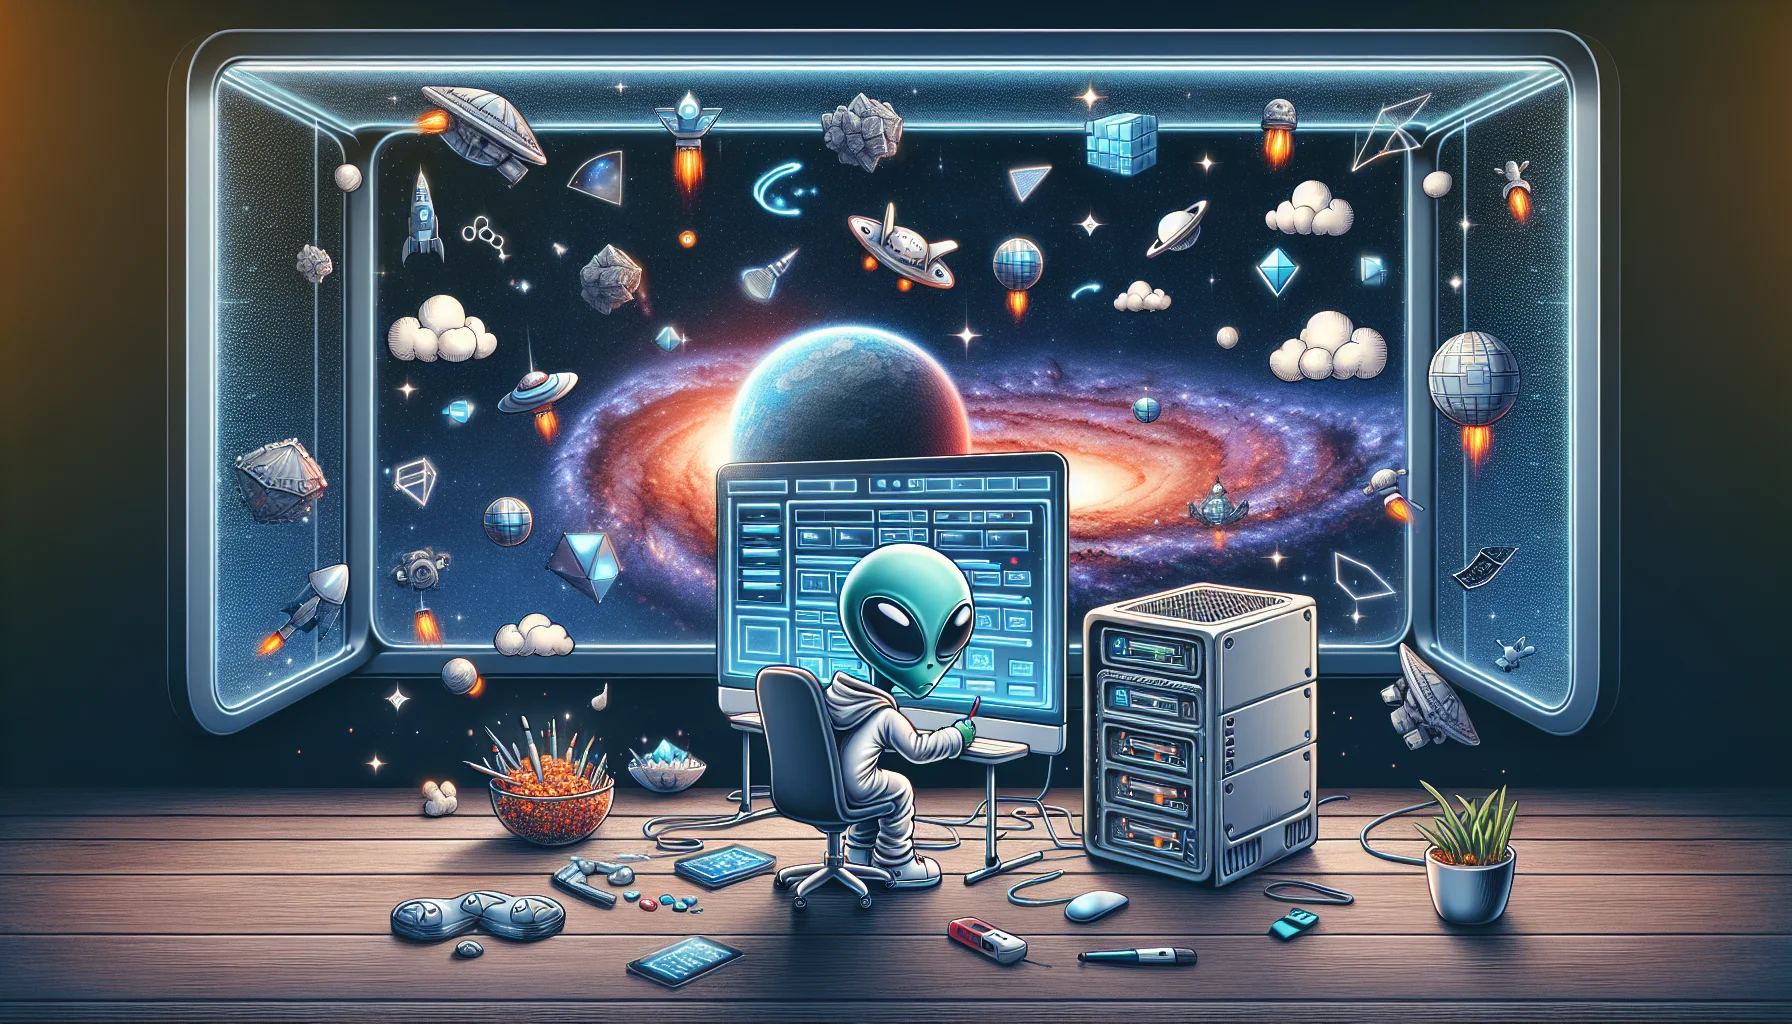 Create an intricately detailed and humorous scene highlighting a universe website builder application. The scenario includes an amiable cartoonish alien of undefined descent, using the software to design a stylish website on its futuristic-looking computer. The alien is surrounded by floating digital shapes and designs, symbolizing different website elements. In the background, there's a stunning view of a starry galaxy seen through a large spacecraft window, highlighting the cosmic theme. Right next to the alien is a comical miniature model of a data center, symbolising web hosting services, with small pixelated clouds fluttering above it.